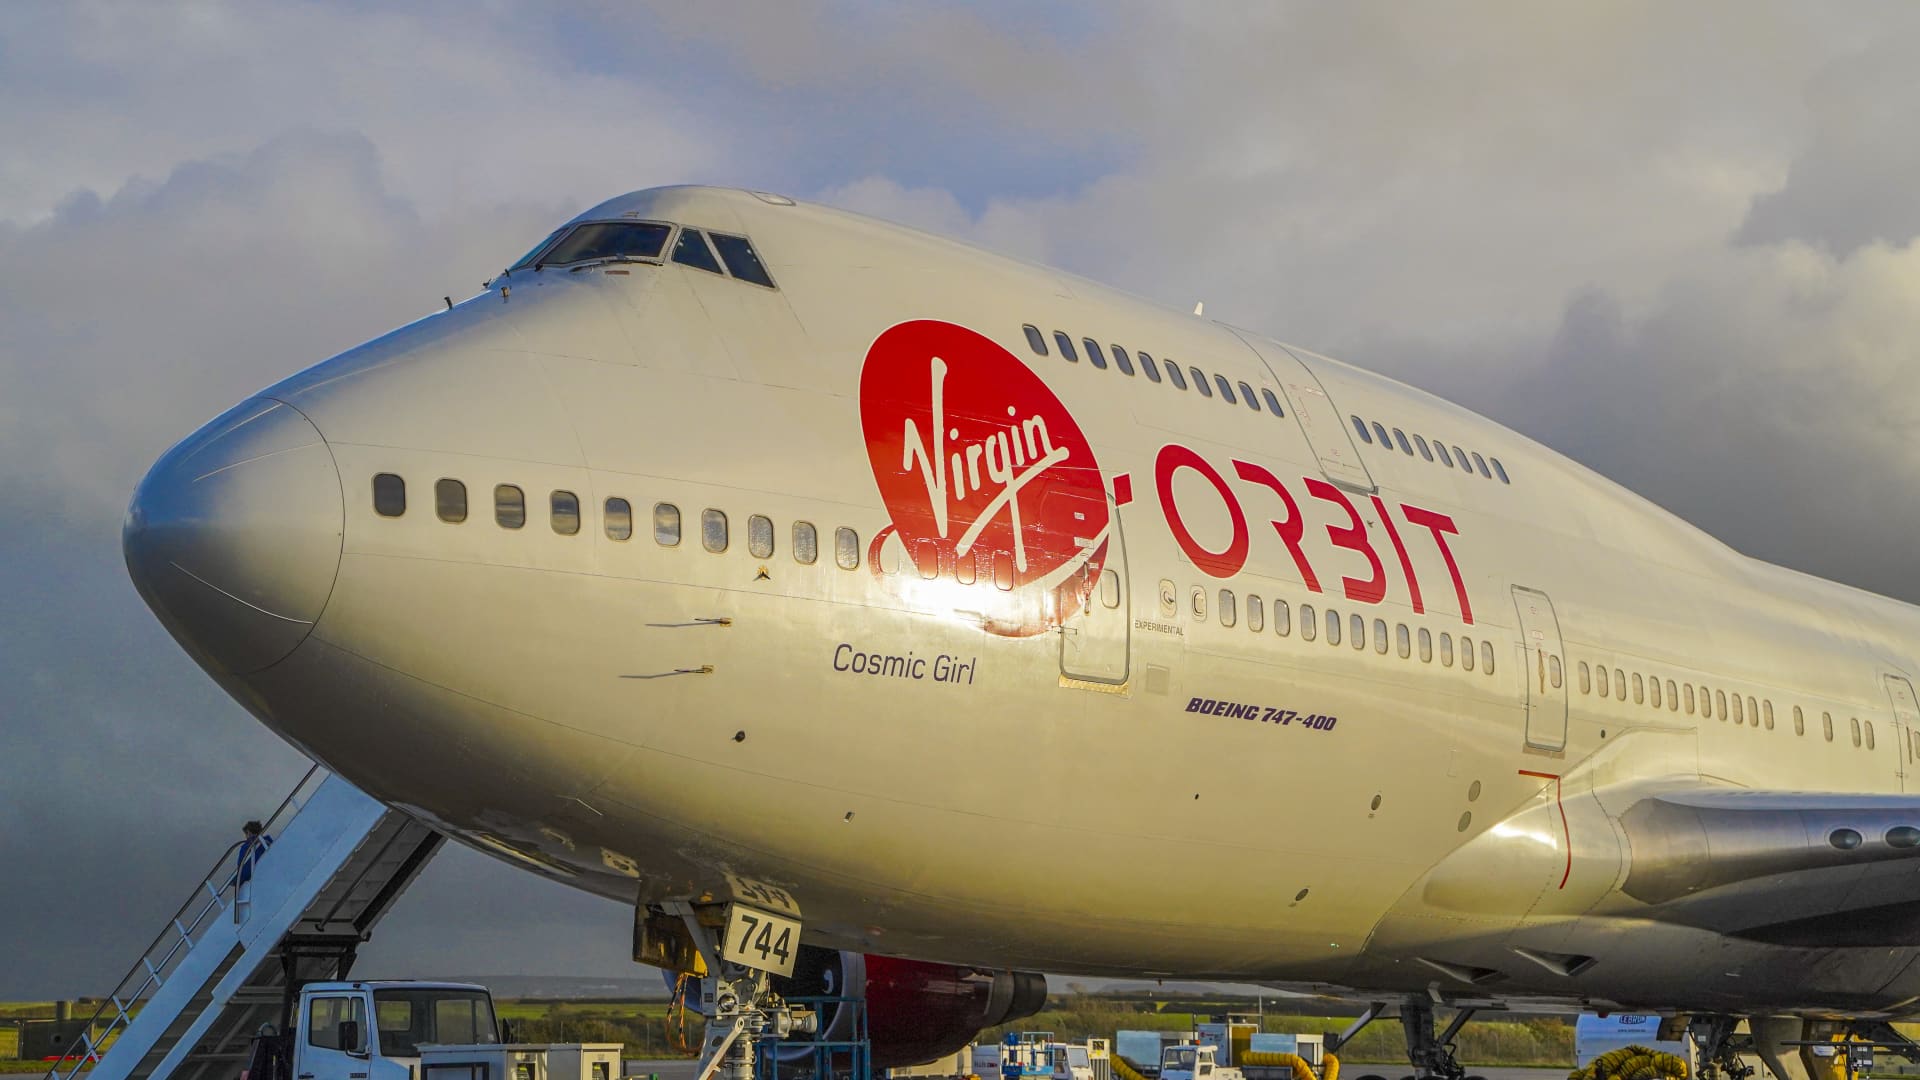 Bankrupt rocket company Virgin Orbit is shutting down after selling its facility leases and equipment to a trio of aerospace companies in an auction, 